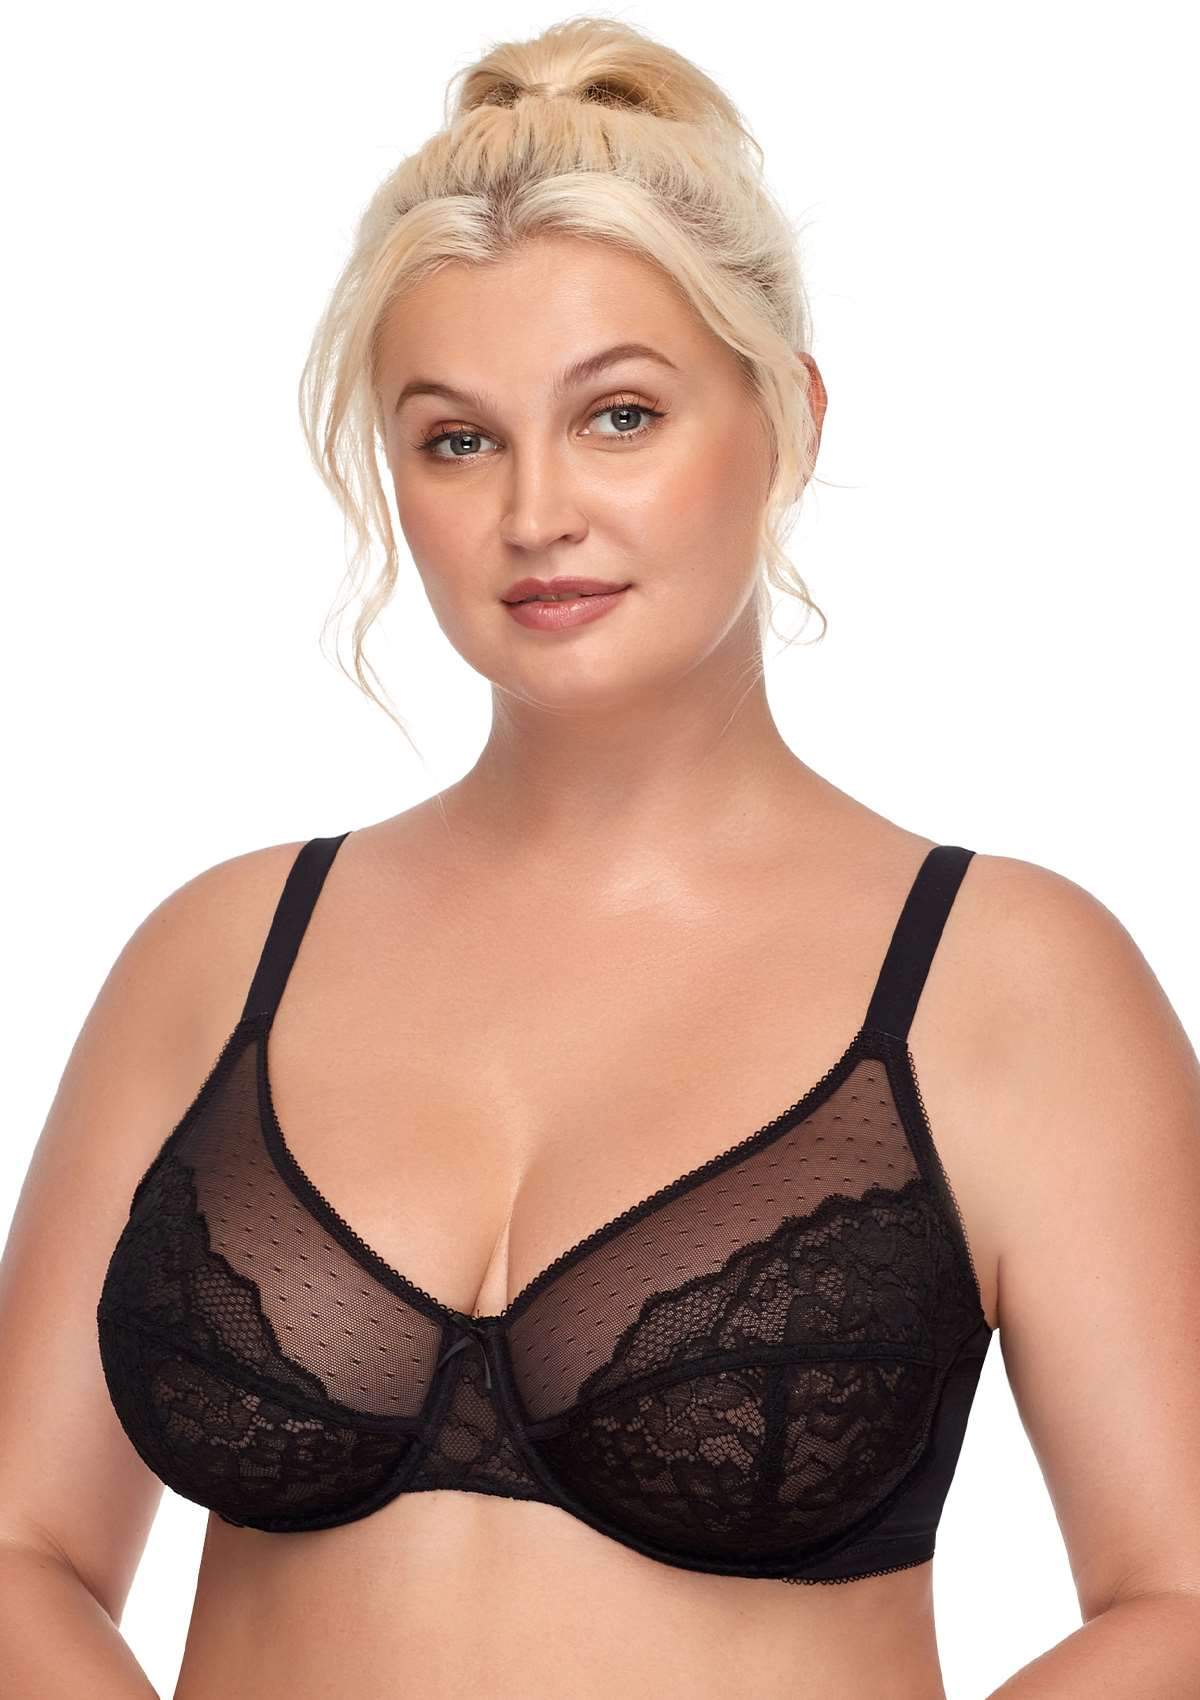 HSIA Enchante Lace Wire Bra For Lifting And Separating Large Breasts - Black / 42 / G